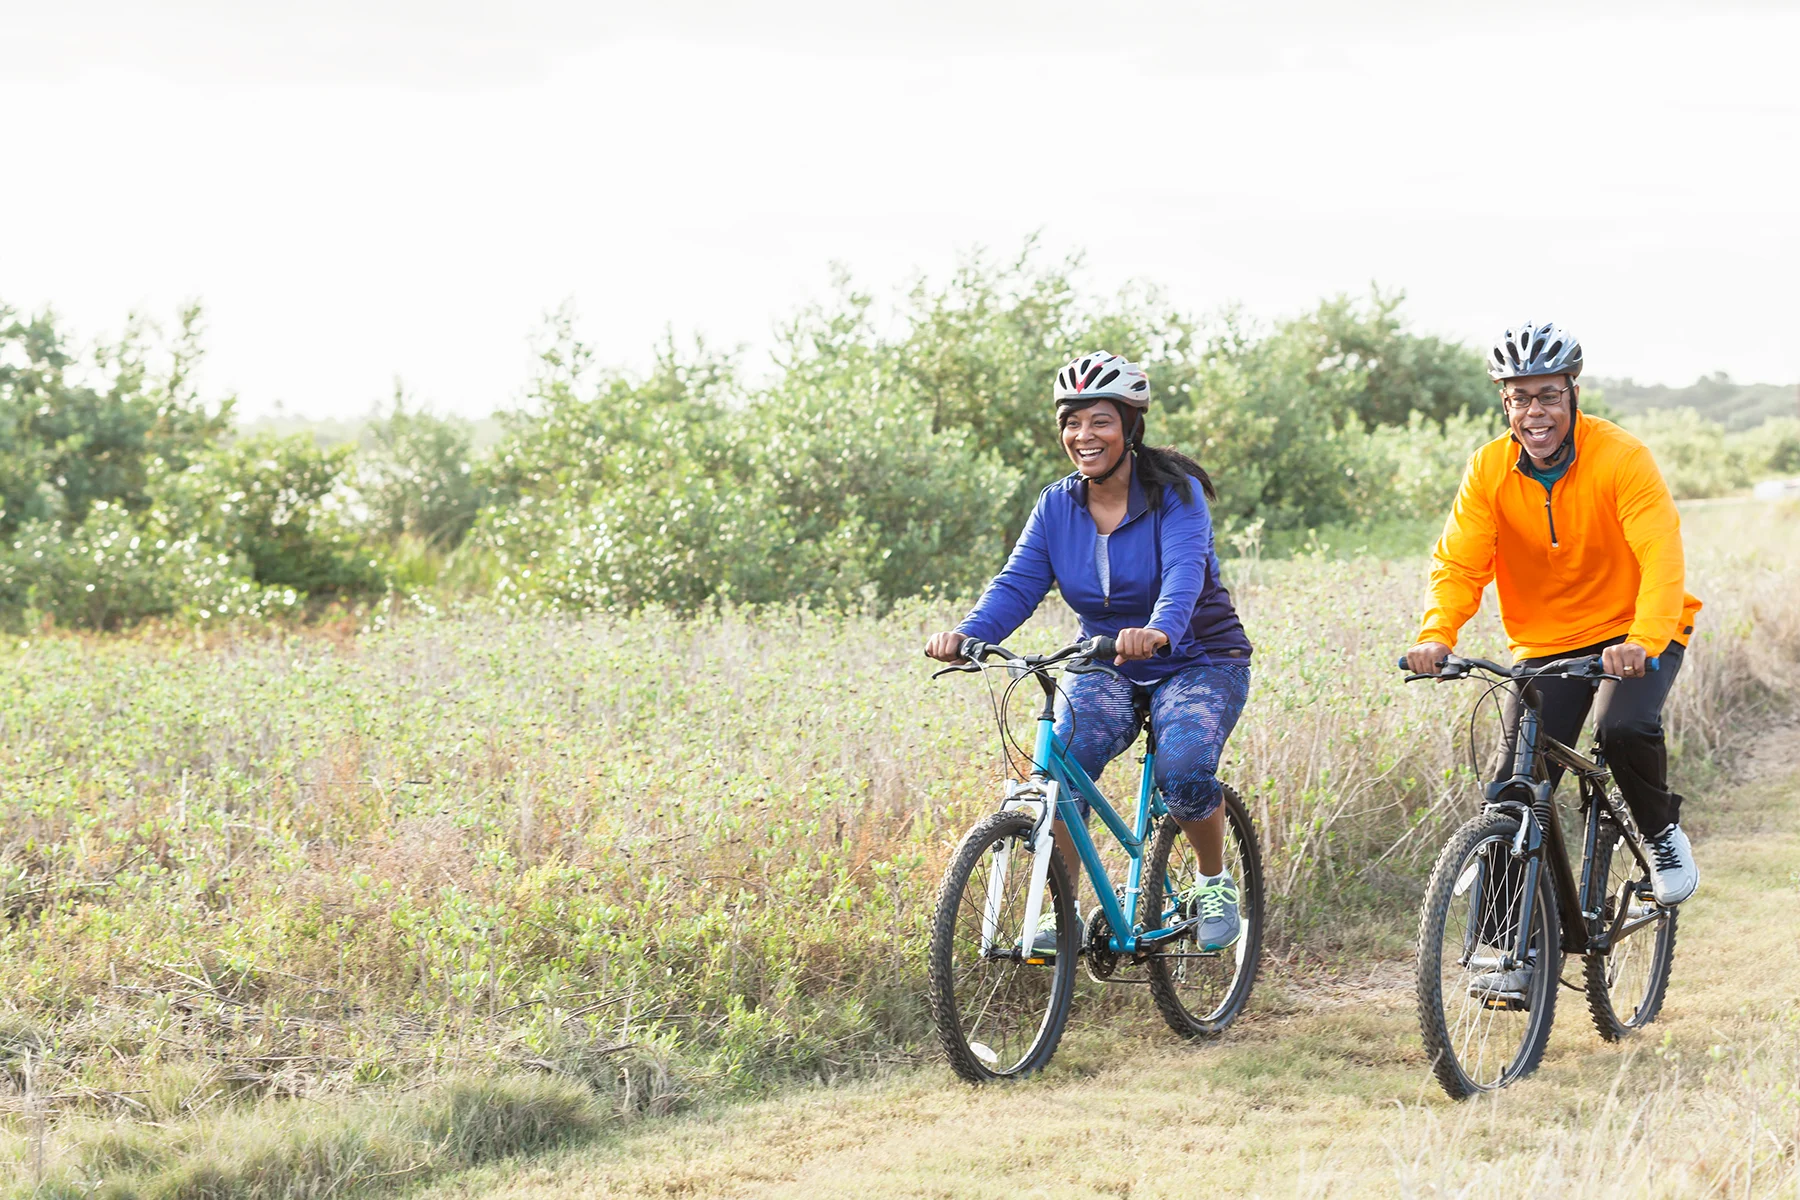 A smiling middle-aged Black woman and Black man in athletic clothing and cycle helmets riding bicycles along a grassy path in the countryside.